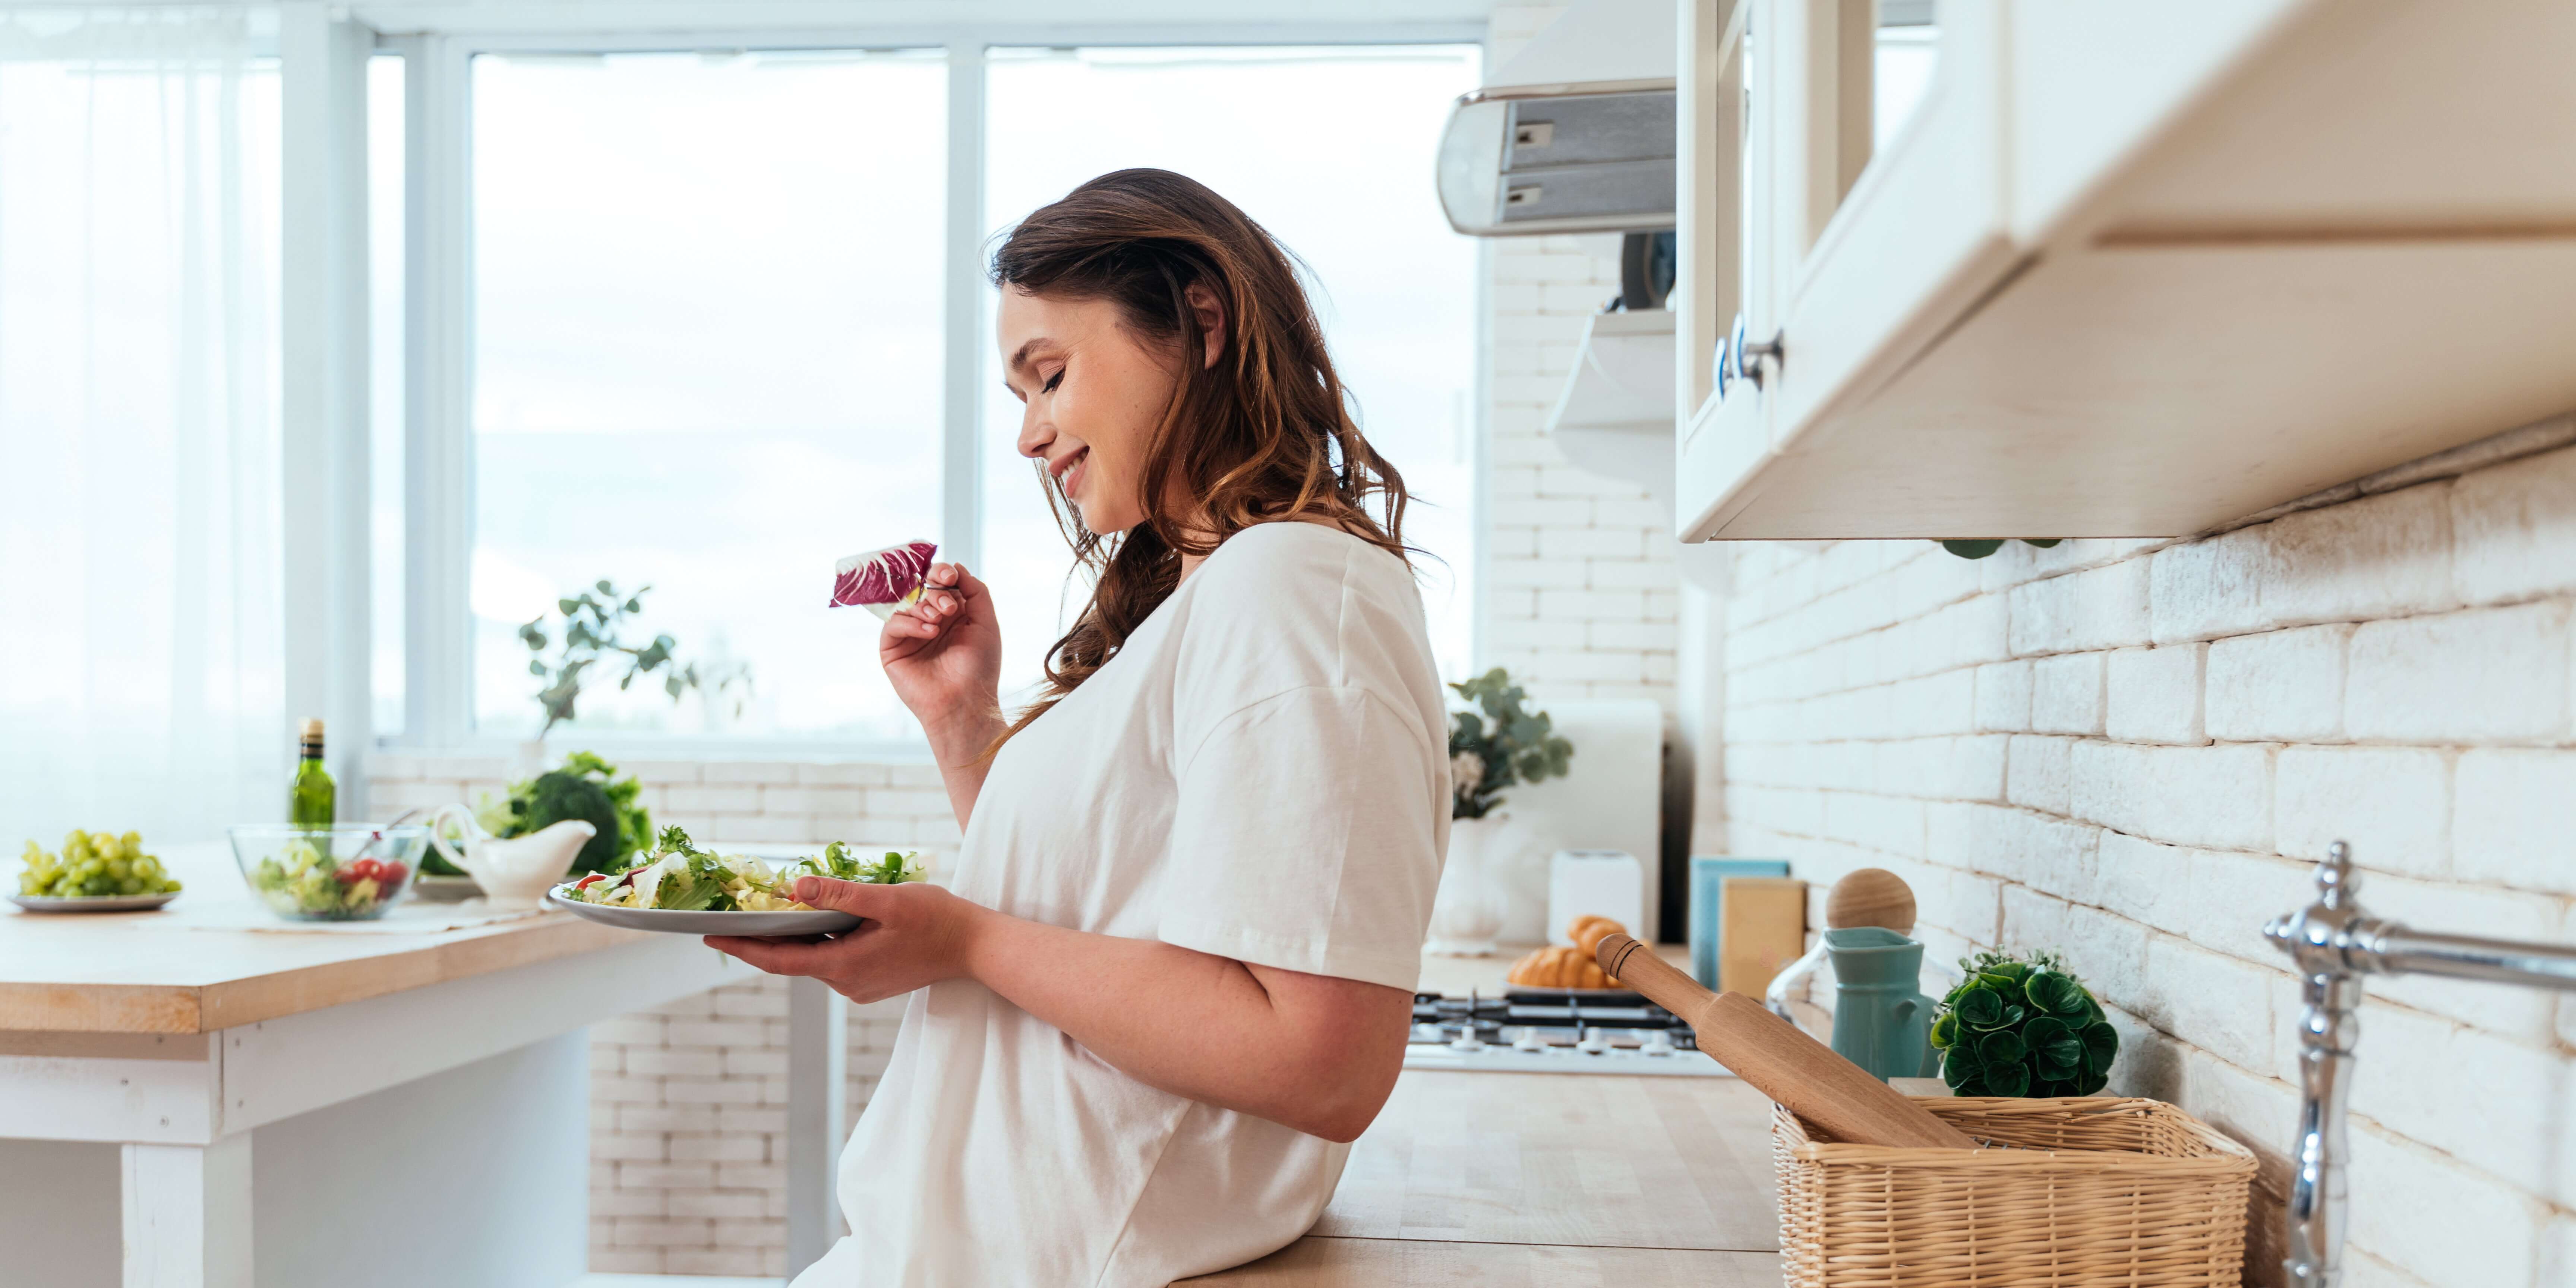 After the custom kitchen remodeling, a woman is admiring a bite of salad in a sunlit kitchen, remodeled with white brick backsplash, sleek wooden countertops, and contemporary appliances, embodying a stylish and functional culinary space.